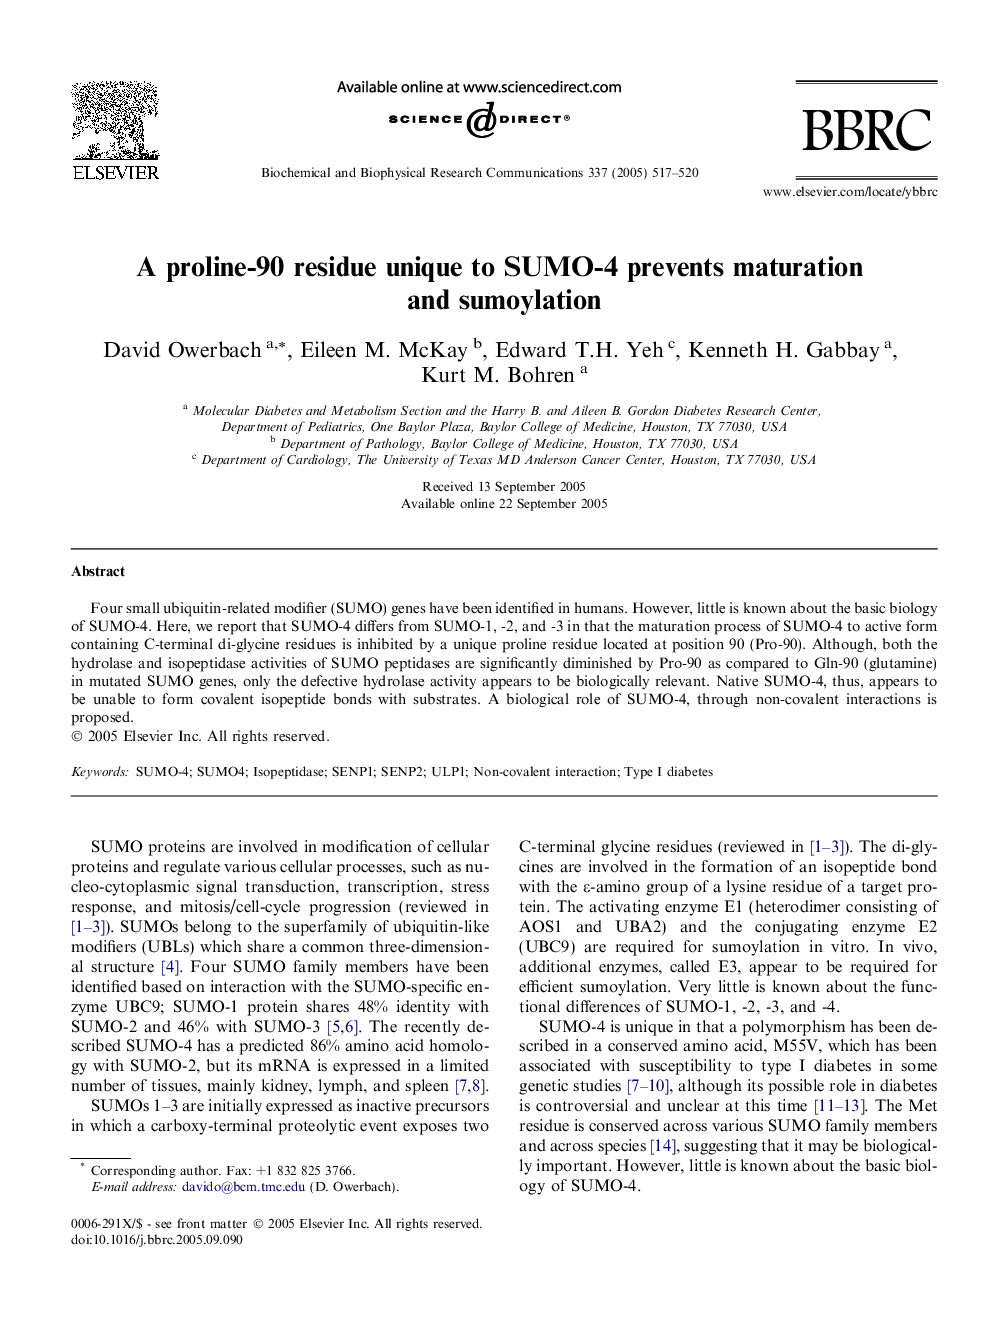 A proline-90 residue unique to SUMO-4 prevents maturation and sumoylation